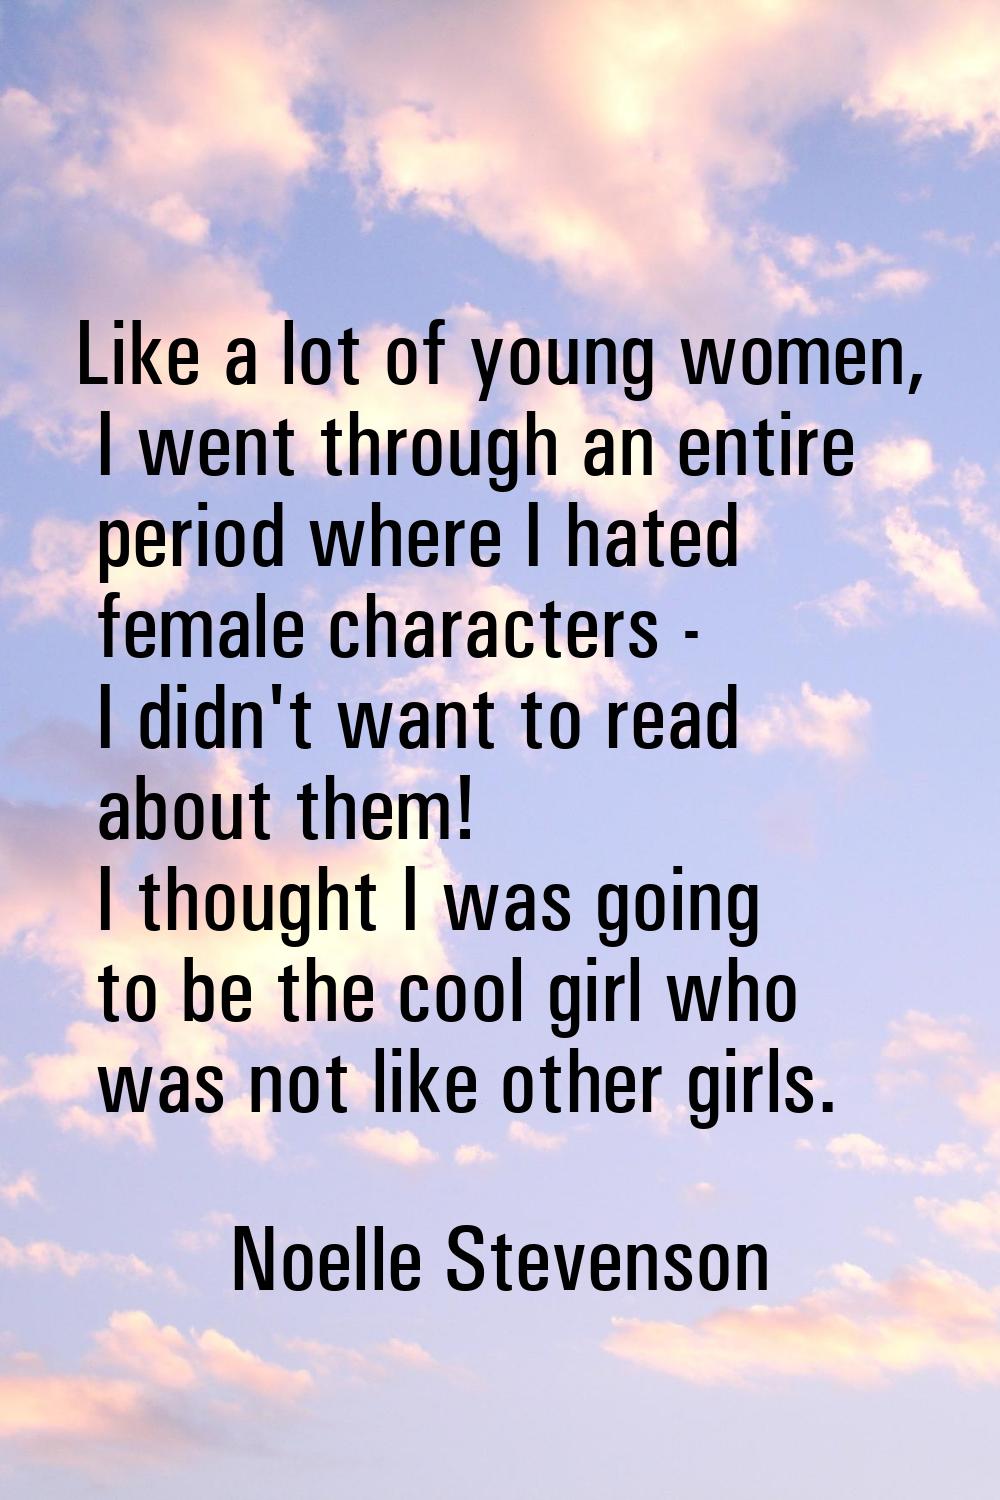 Like a lot of young women, I went through an entire period where I hated female characters - I didn